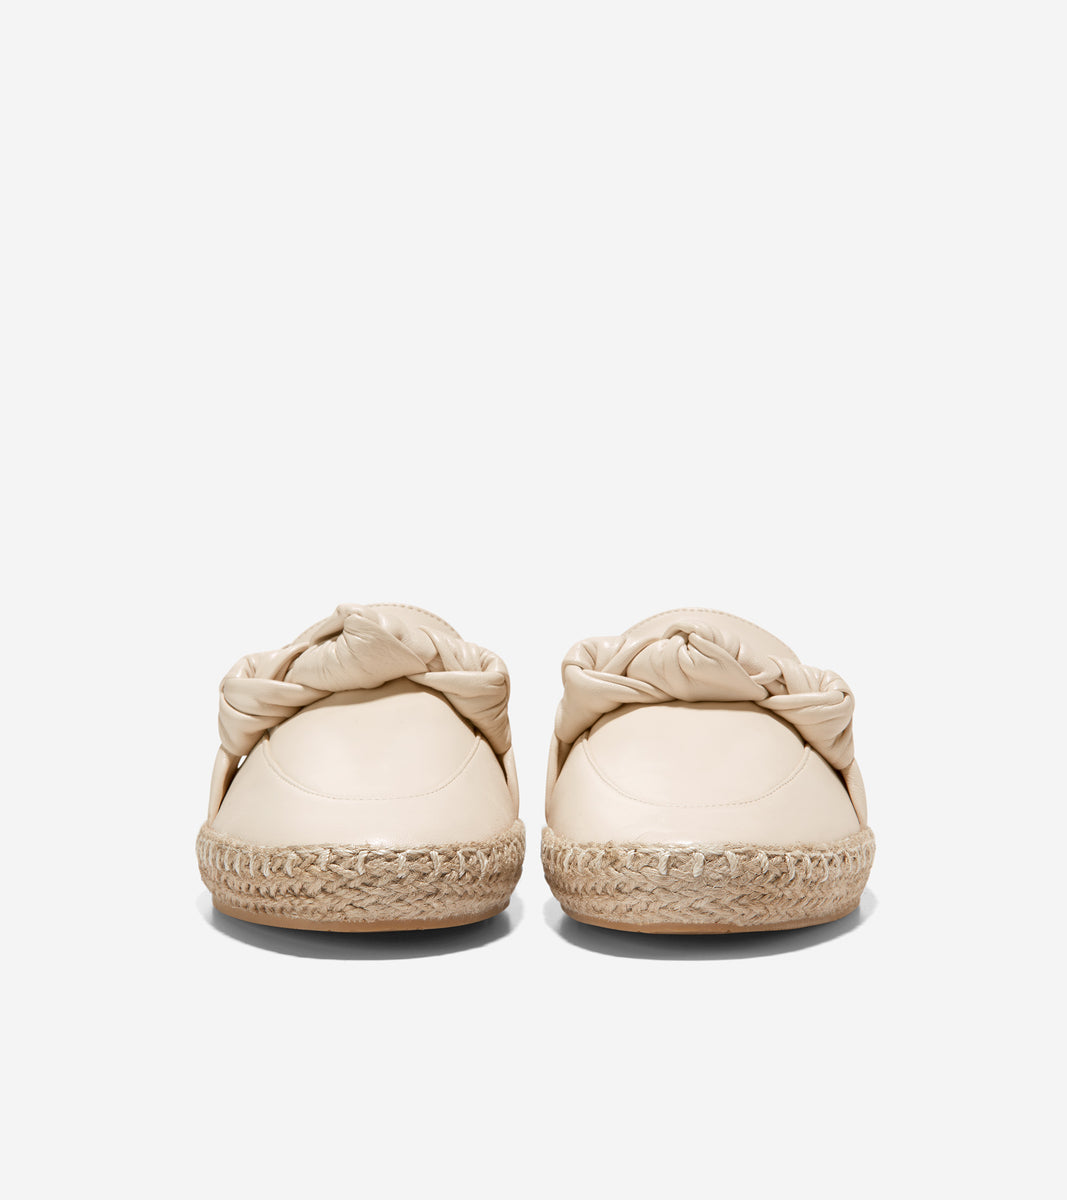 w28160-Women's Cloudfeel Knotted Espadrille-Angora Leather